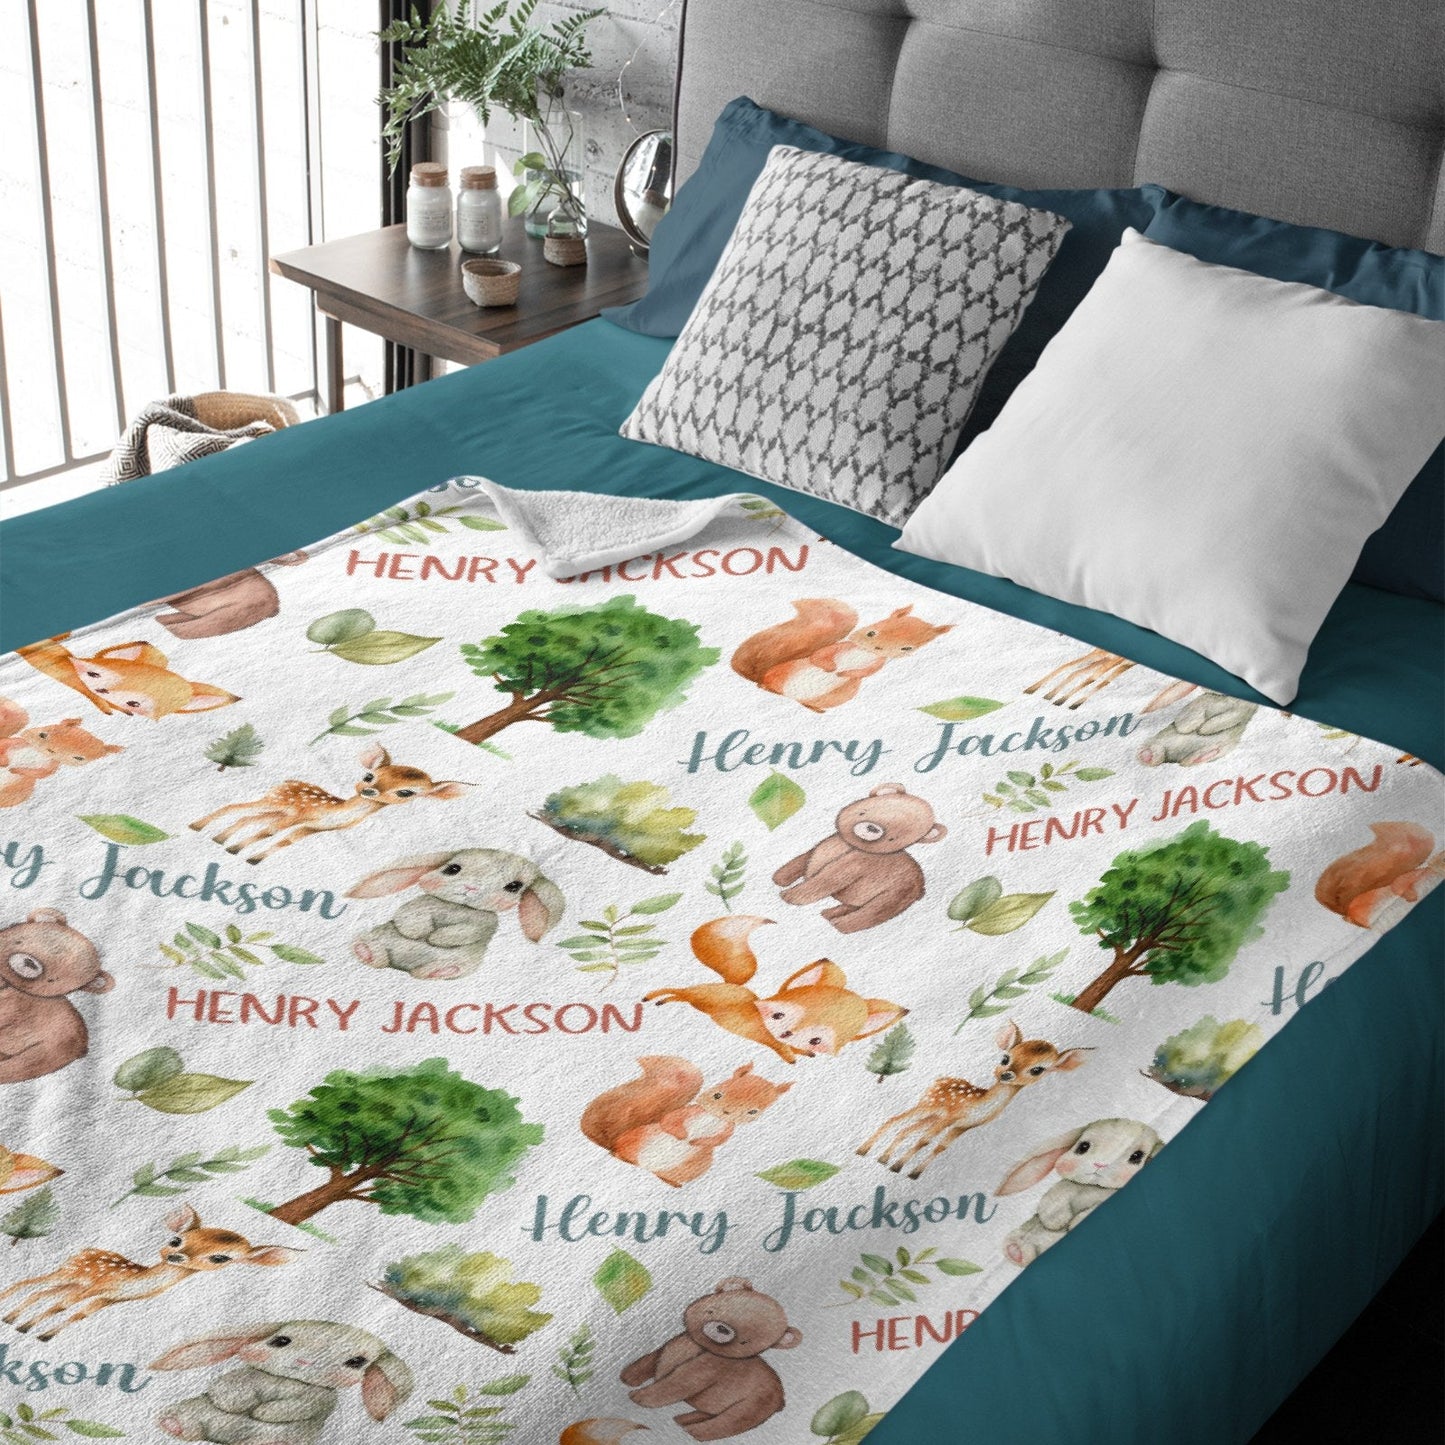 ️Personalized Forest Animals Theme Baby Name Blanket